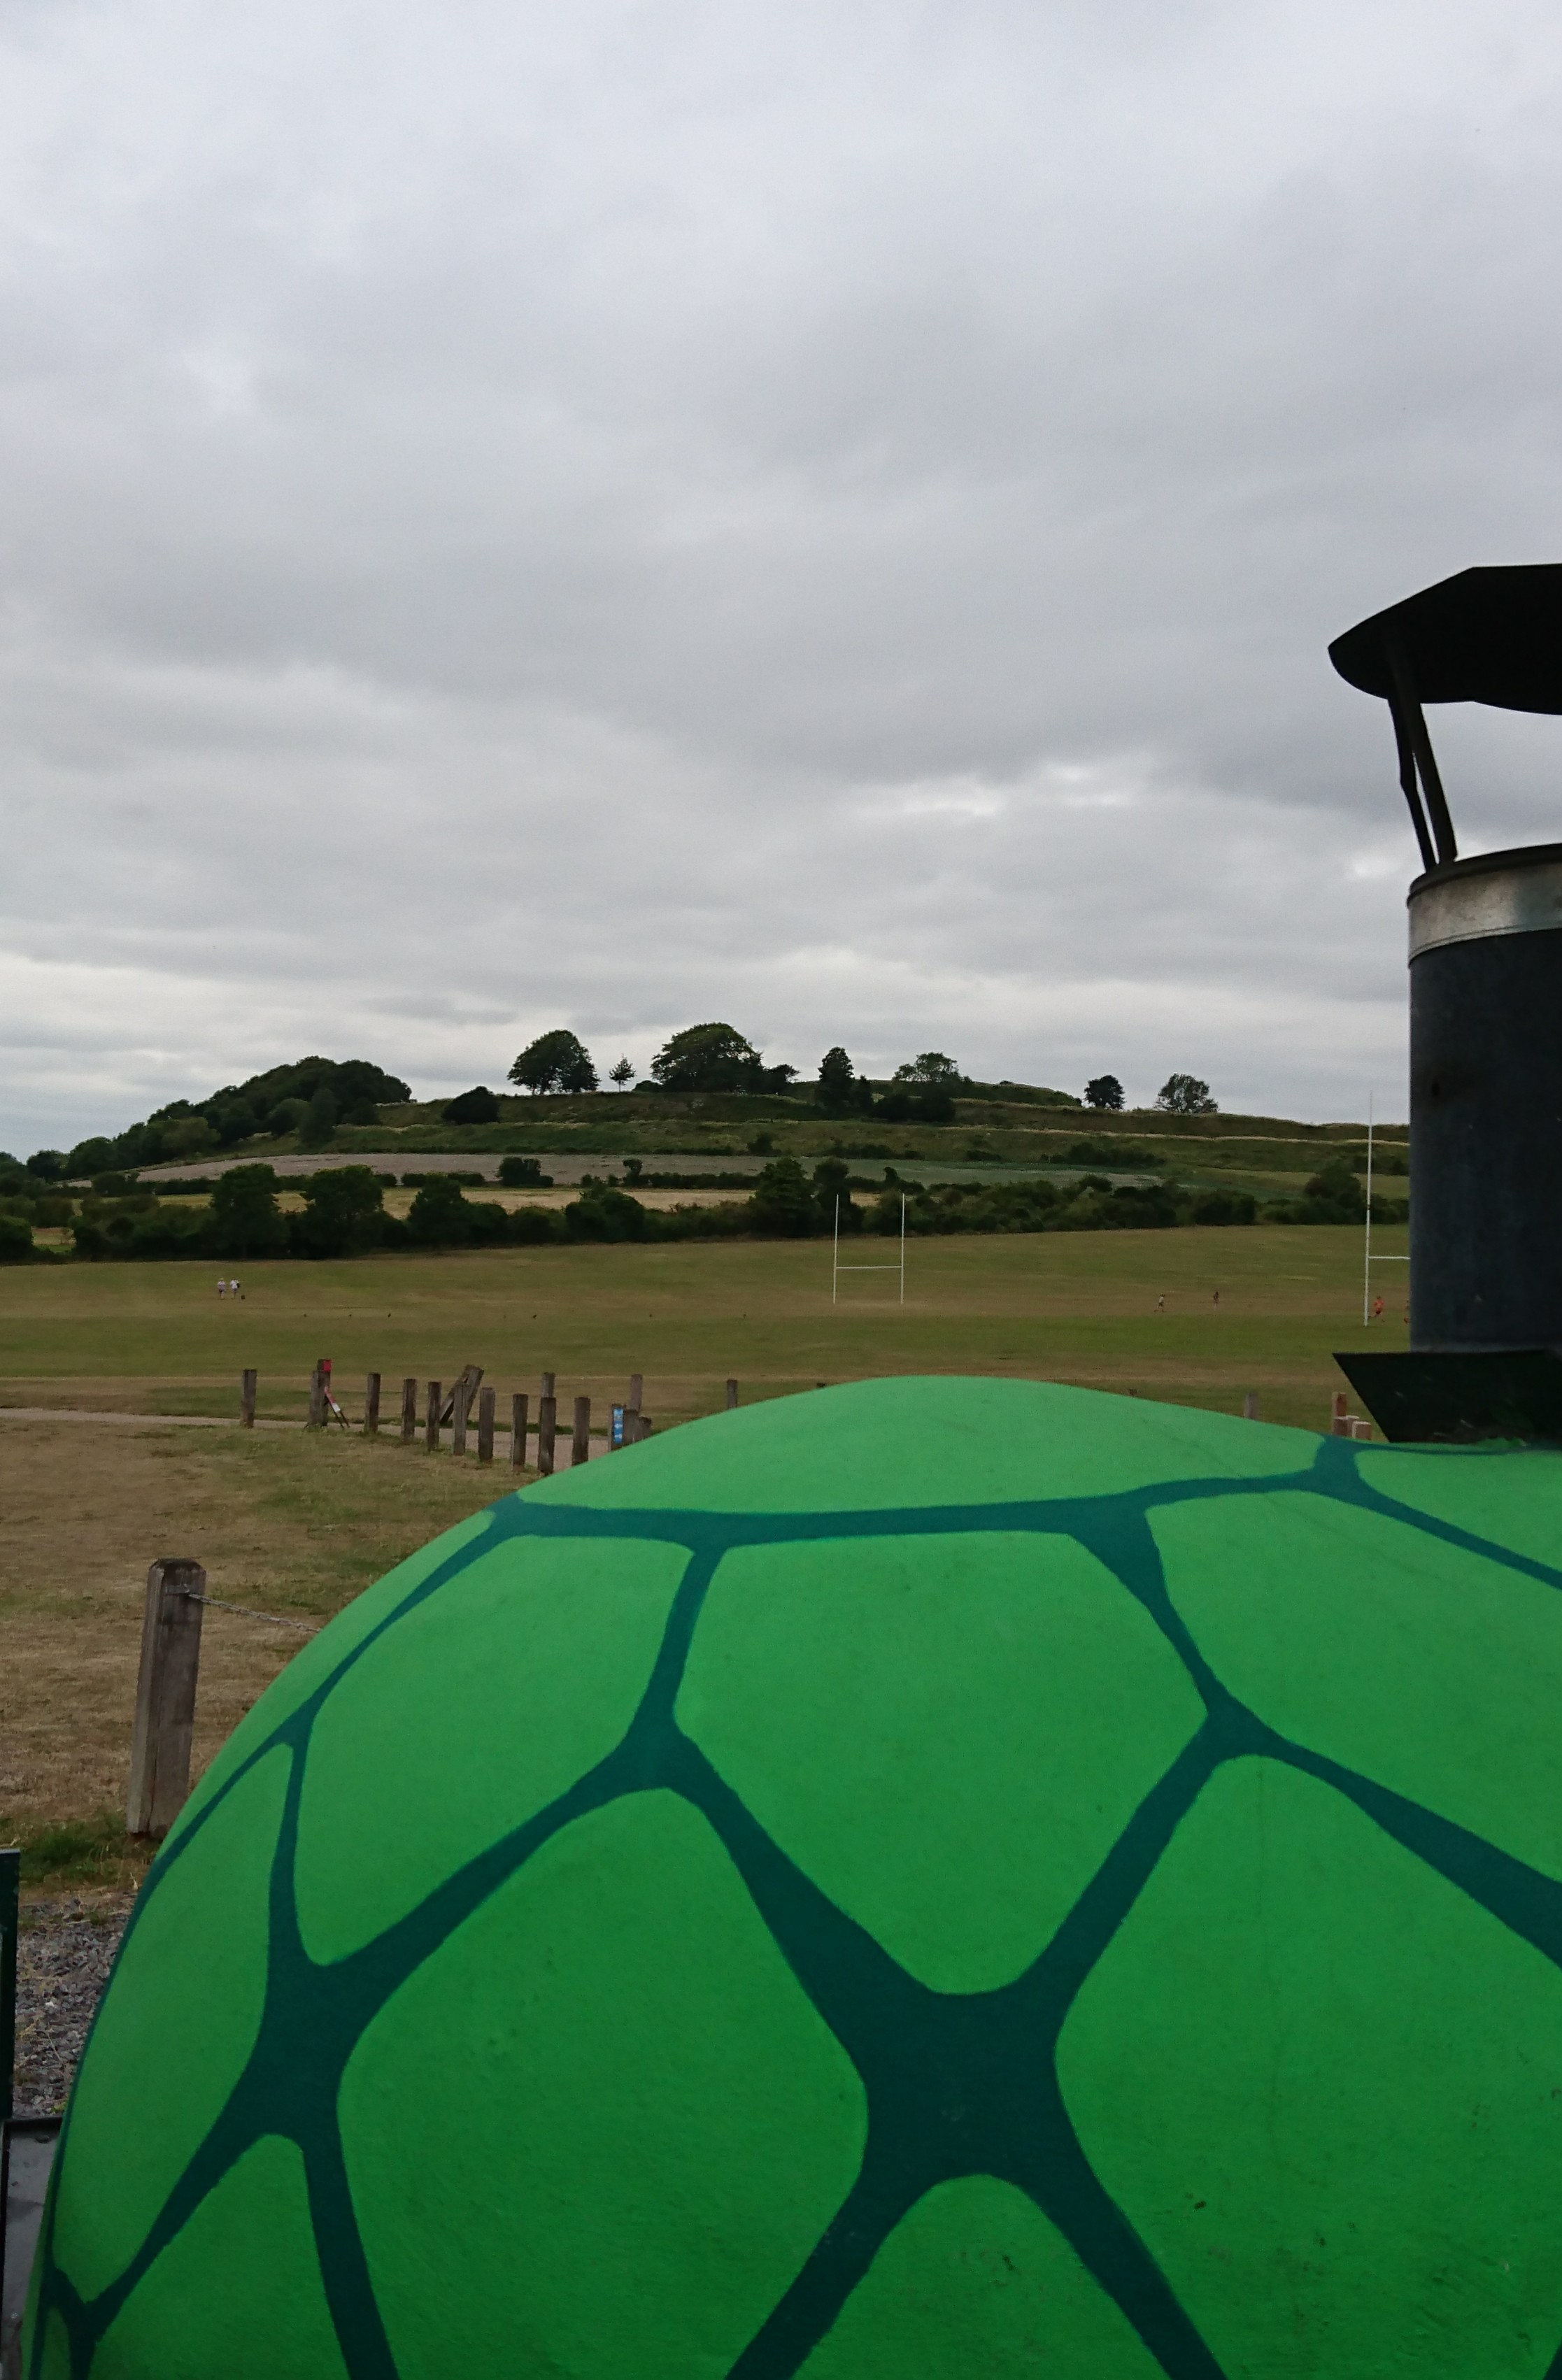 Hot Turtle Wood Fired Pizza at Old Sarum